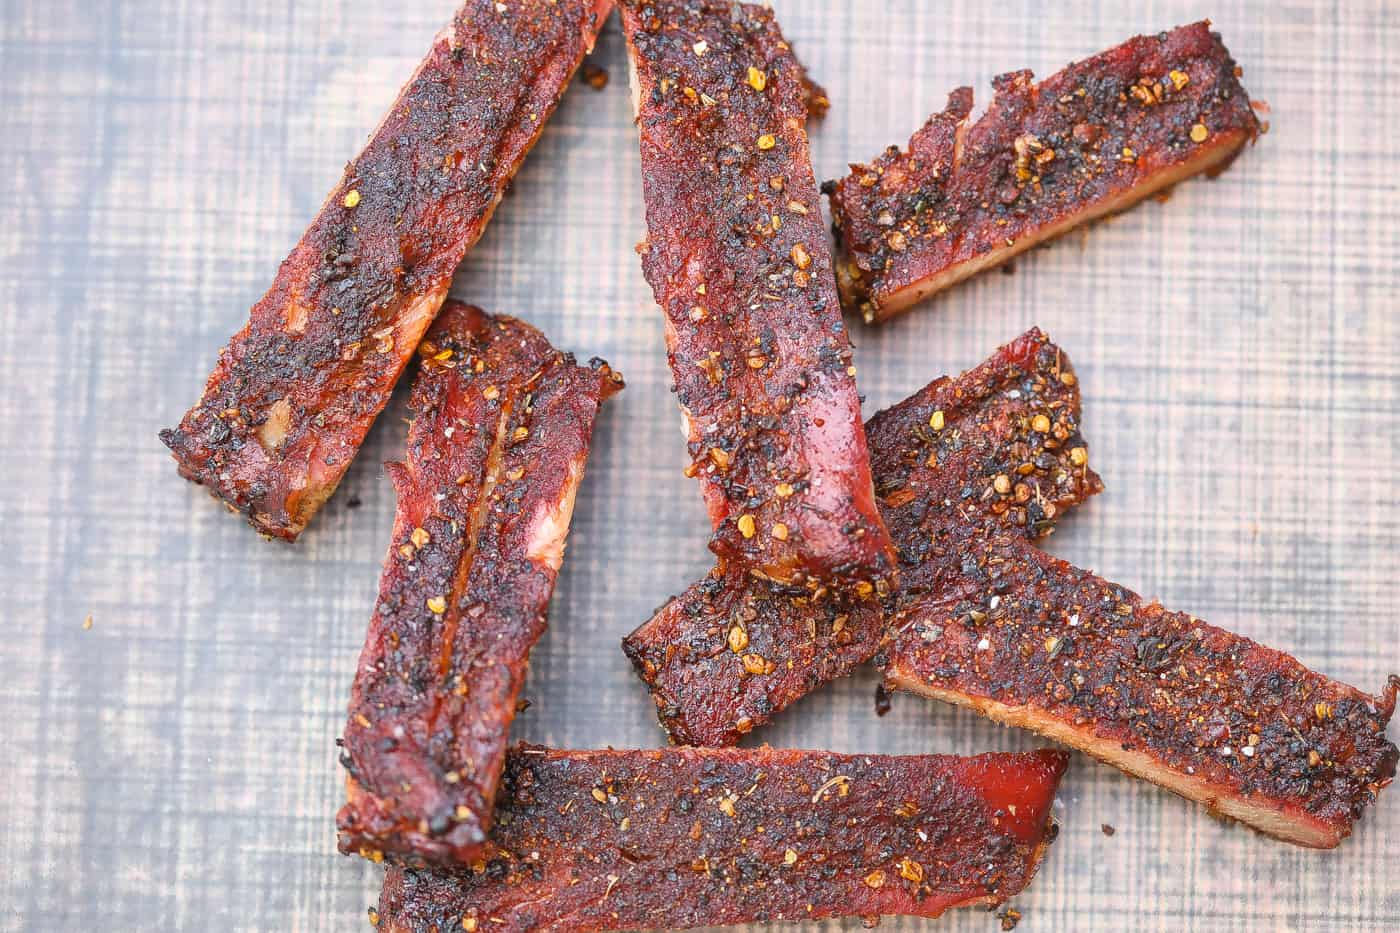 https://www.foodfidelity.com/wp-content/uploads/2018/07/african-spiced-ribs-hor-1-3.jpg